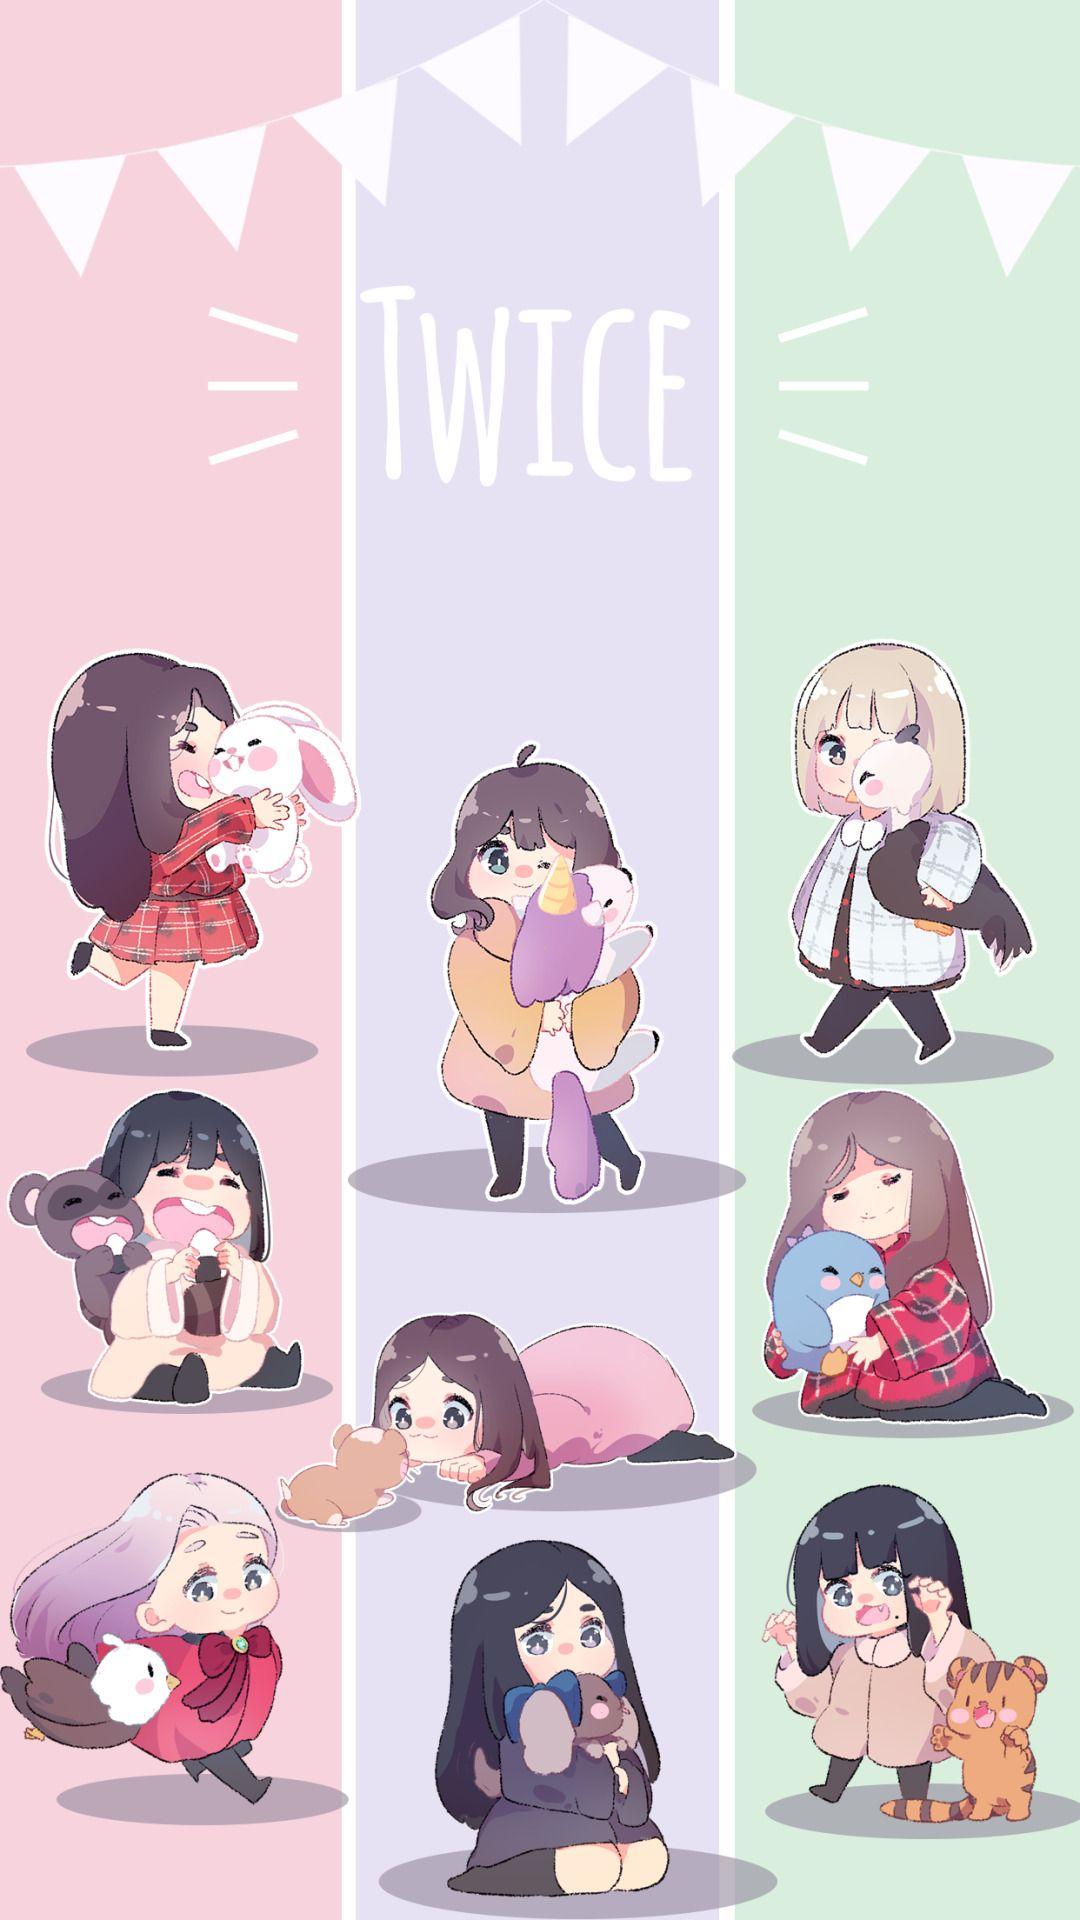 TWICE Anime (fanart) by Mhedificent by MhedyyChan on DeviantArt